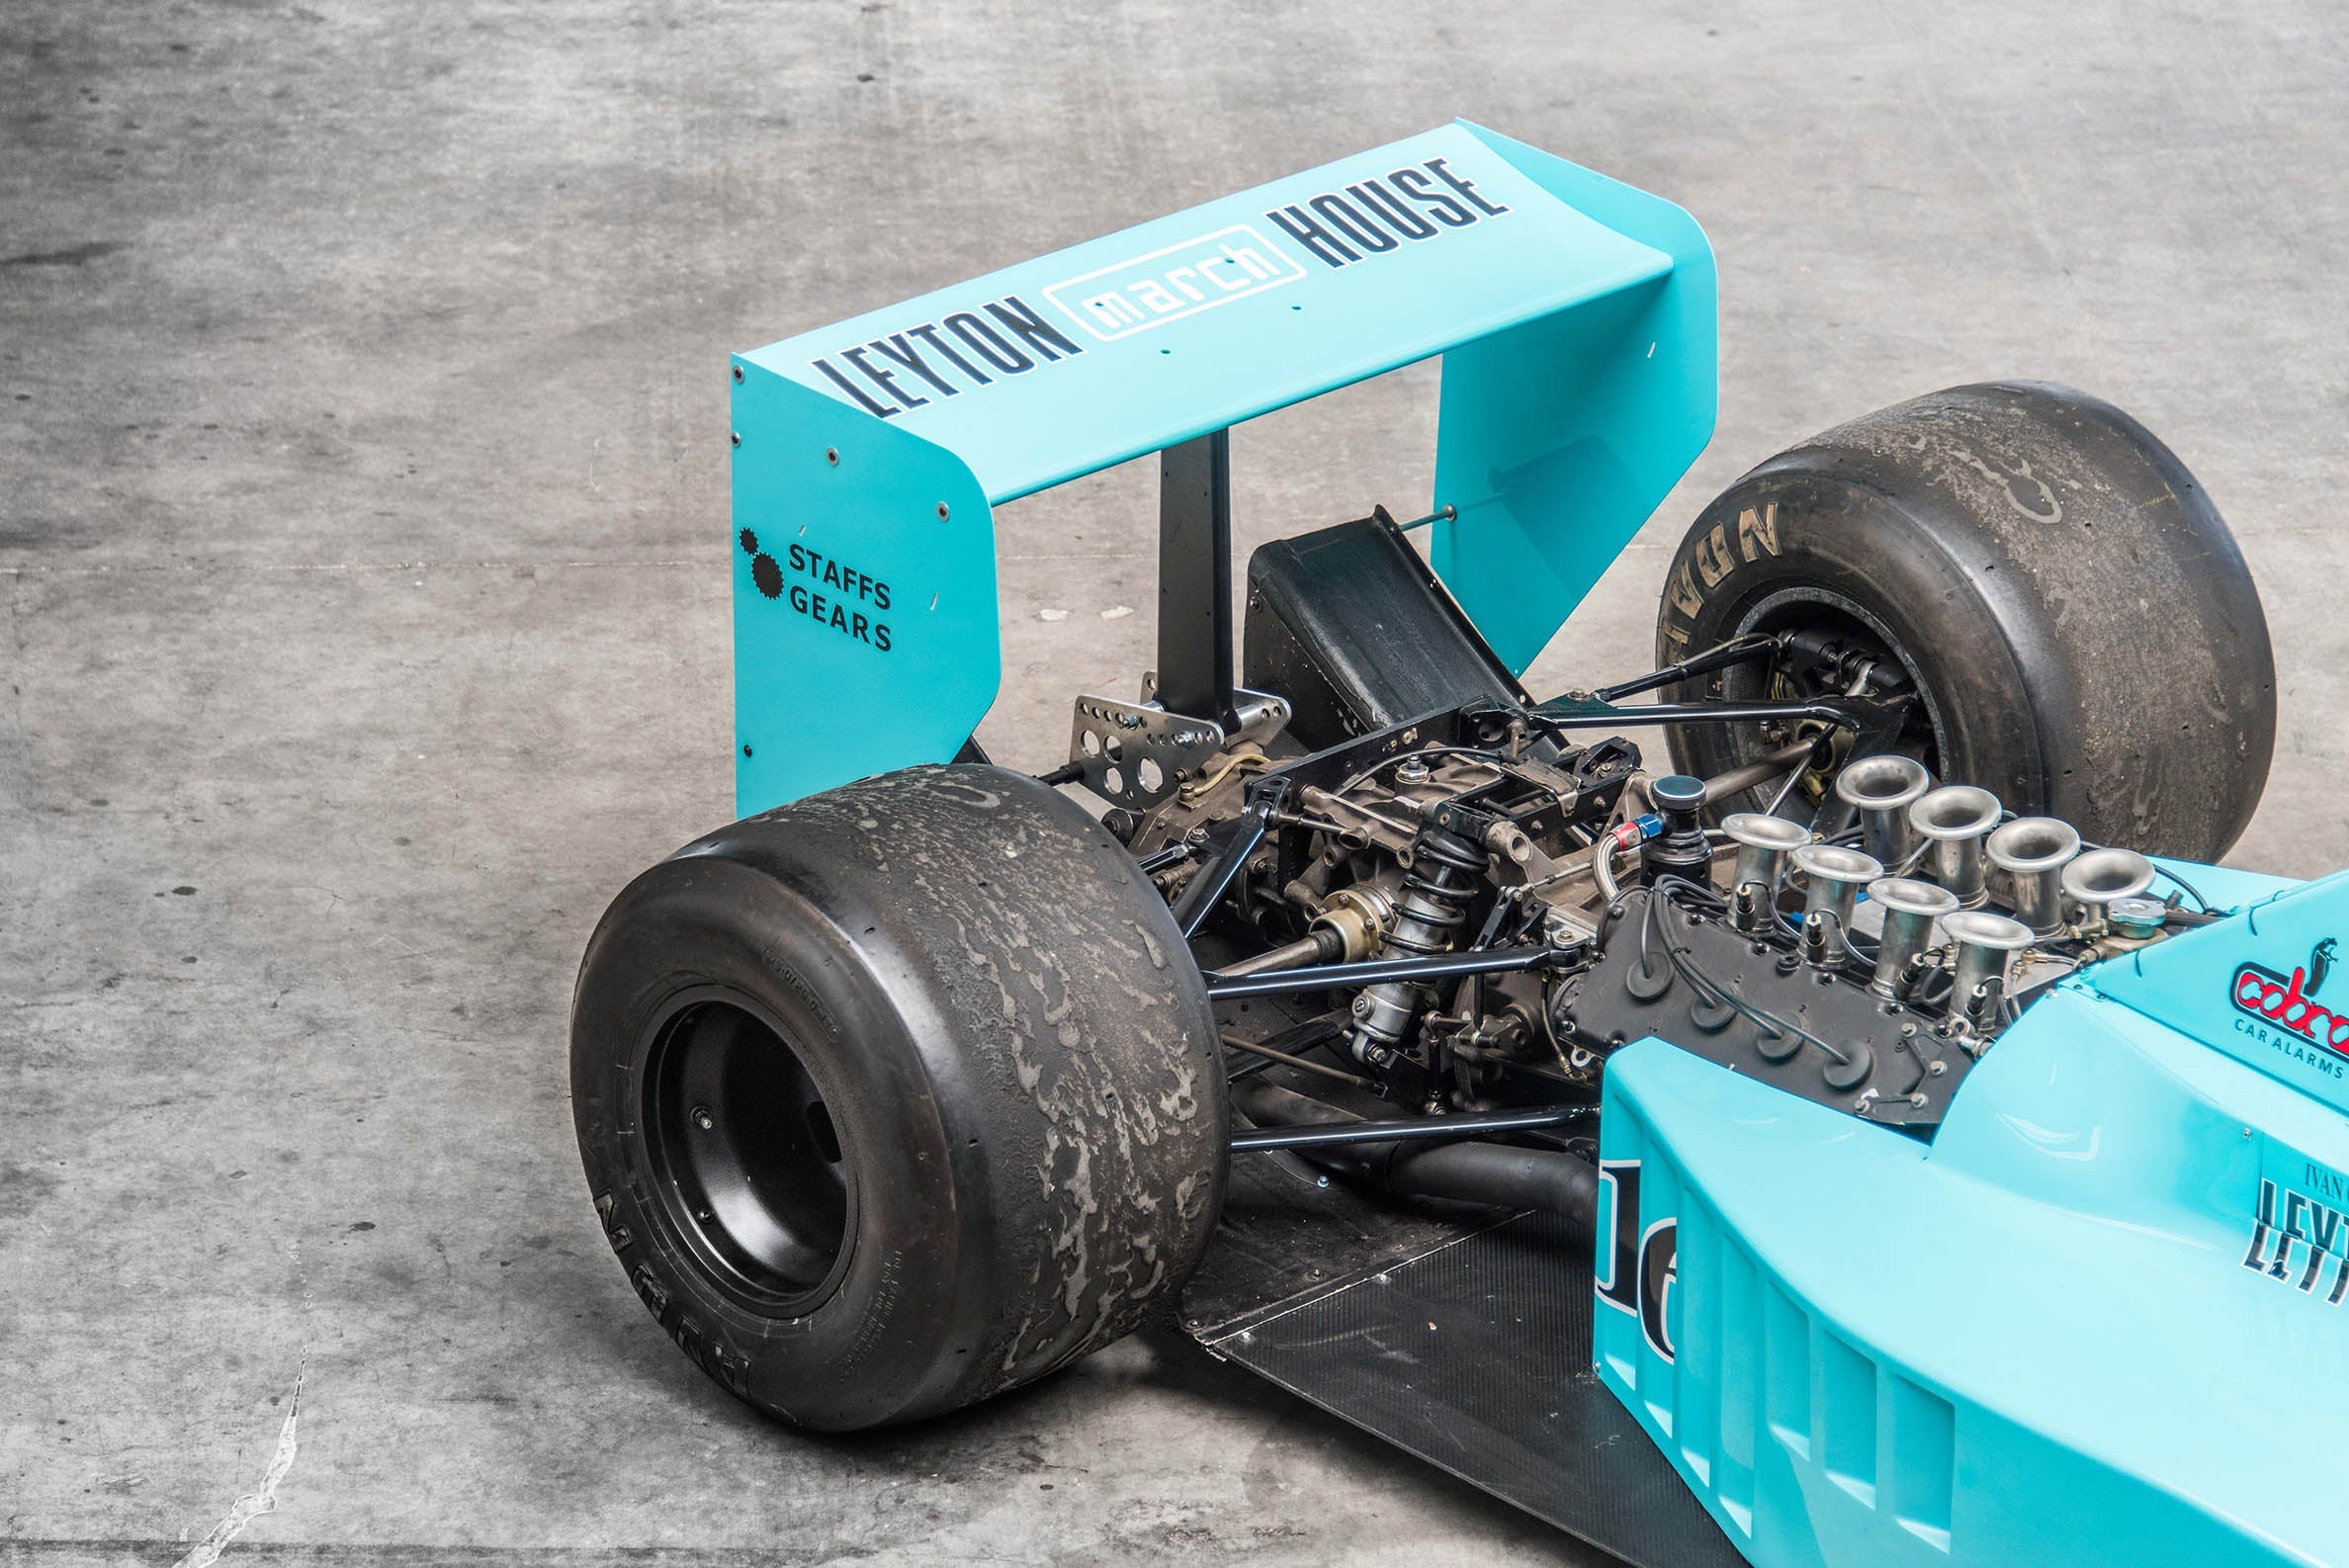 1987 March Engineering Leyton House Official Show Car